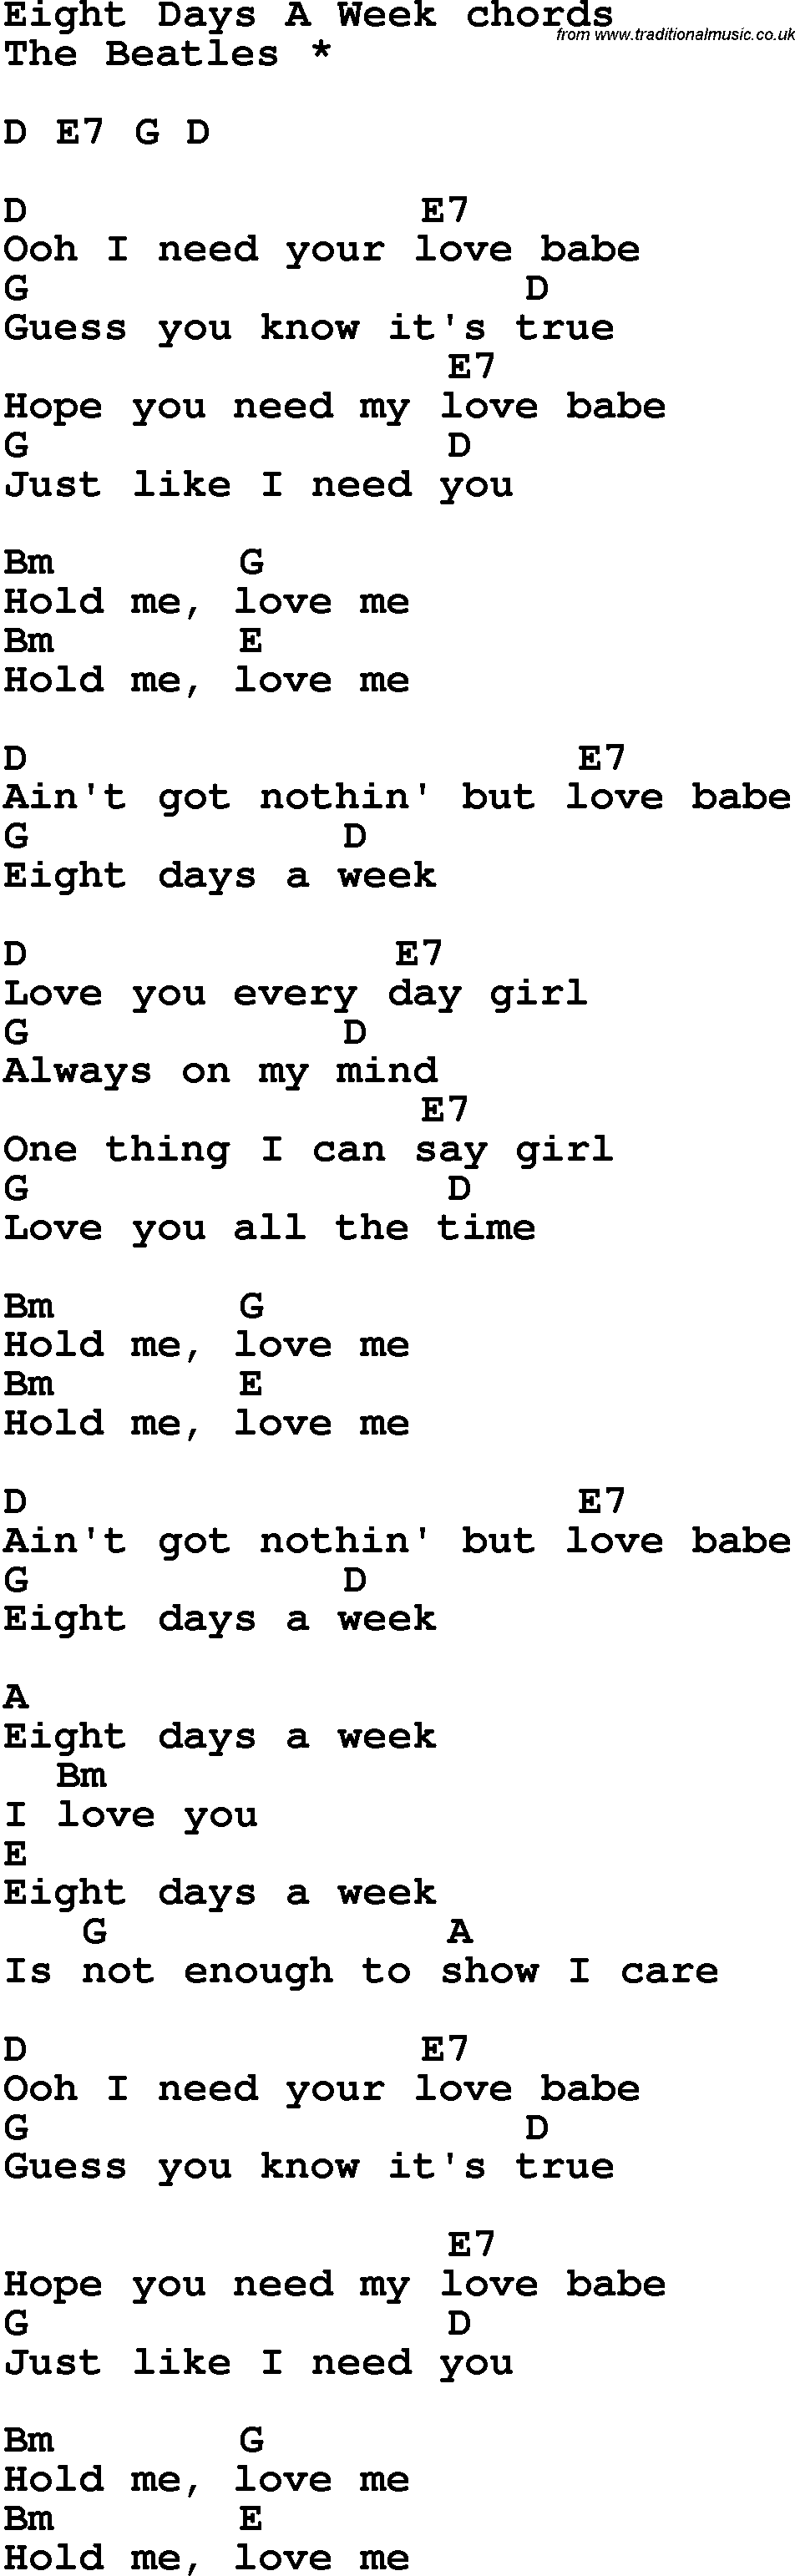 Song Lyrics with guitar chords for Eight Days A Week - The Beatles